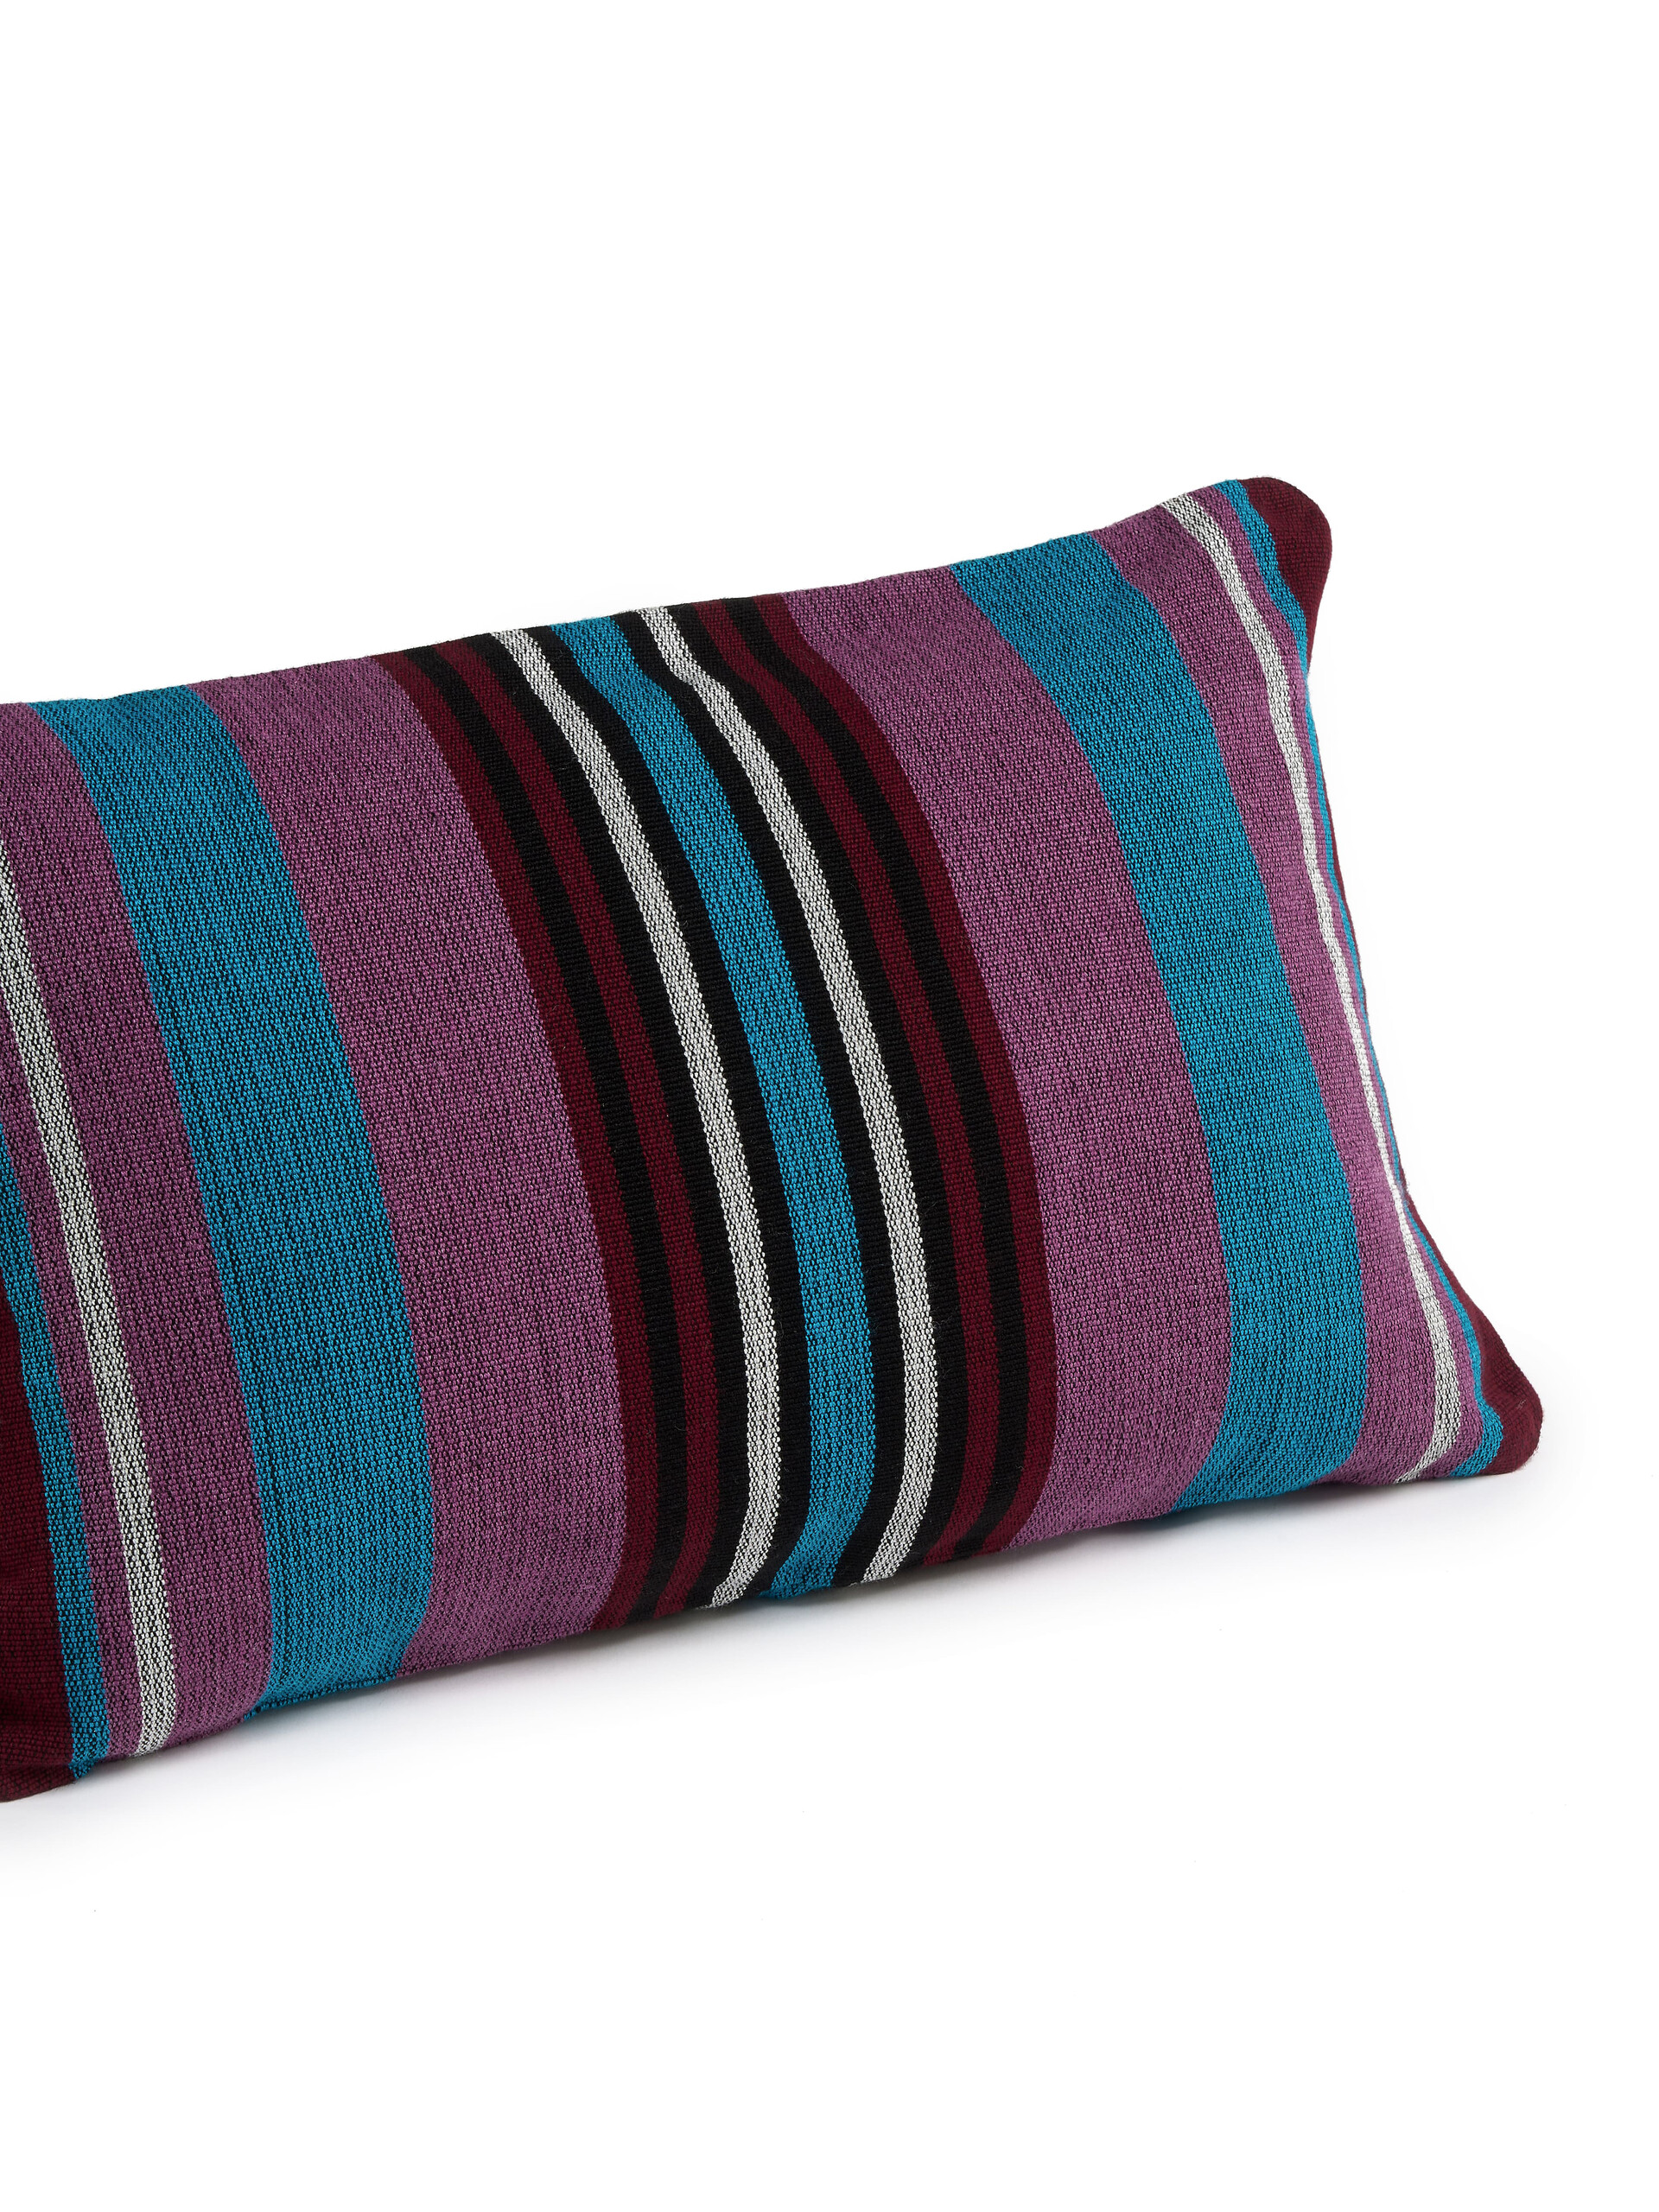 MARNI MARKET rectangular pillow cover in polyester with green burgundy and pale blue vertical stripes - Furniture - Image 3